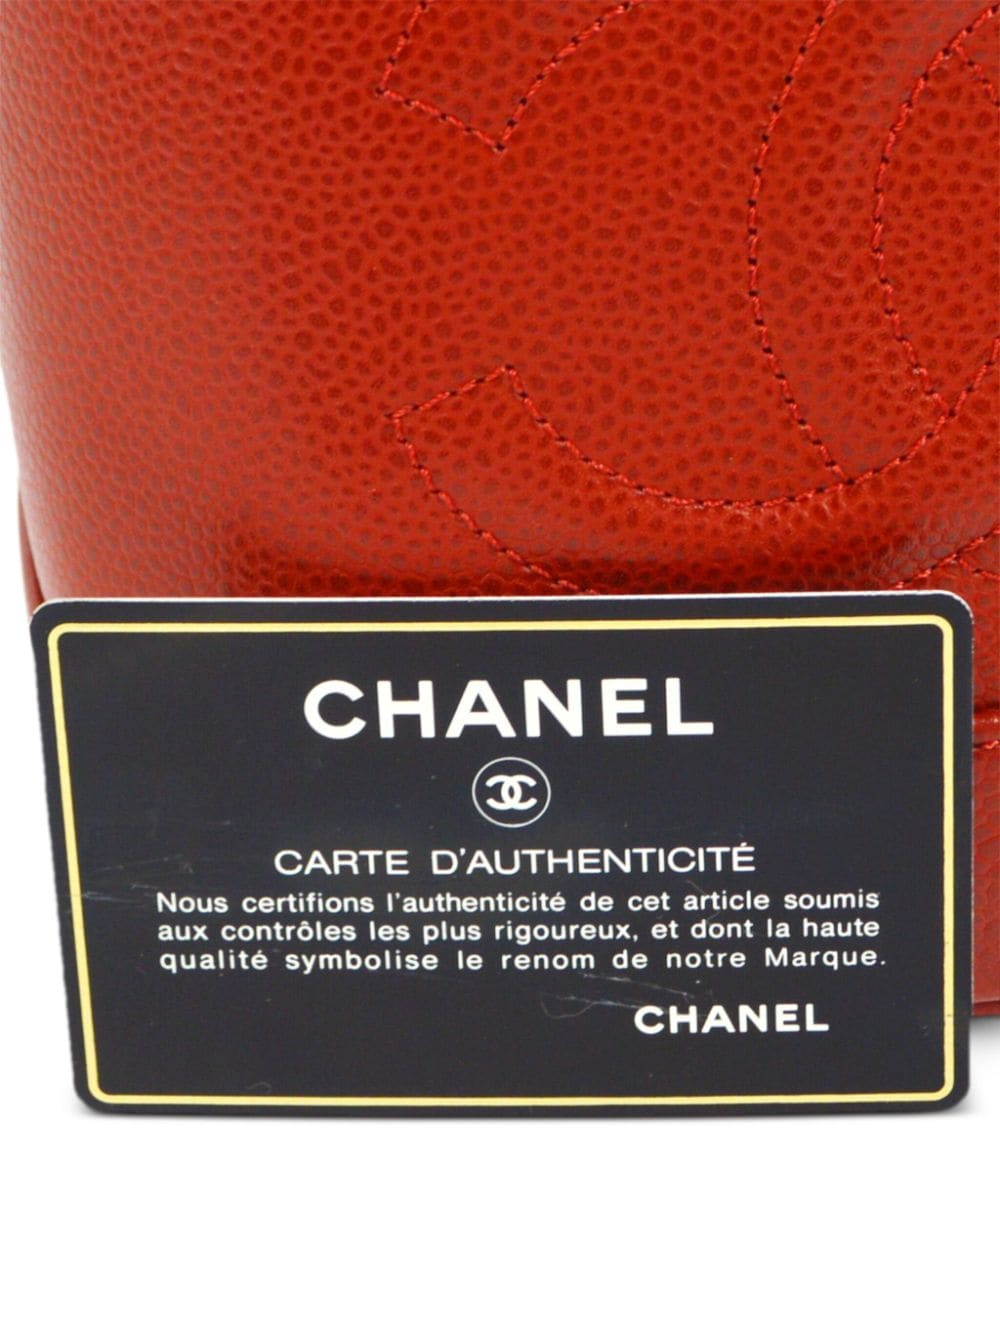 Pre-owned Chanel Cc 缝线化妆手提包（1995年典藏款） In Red